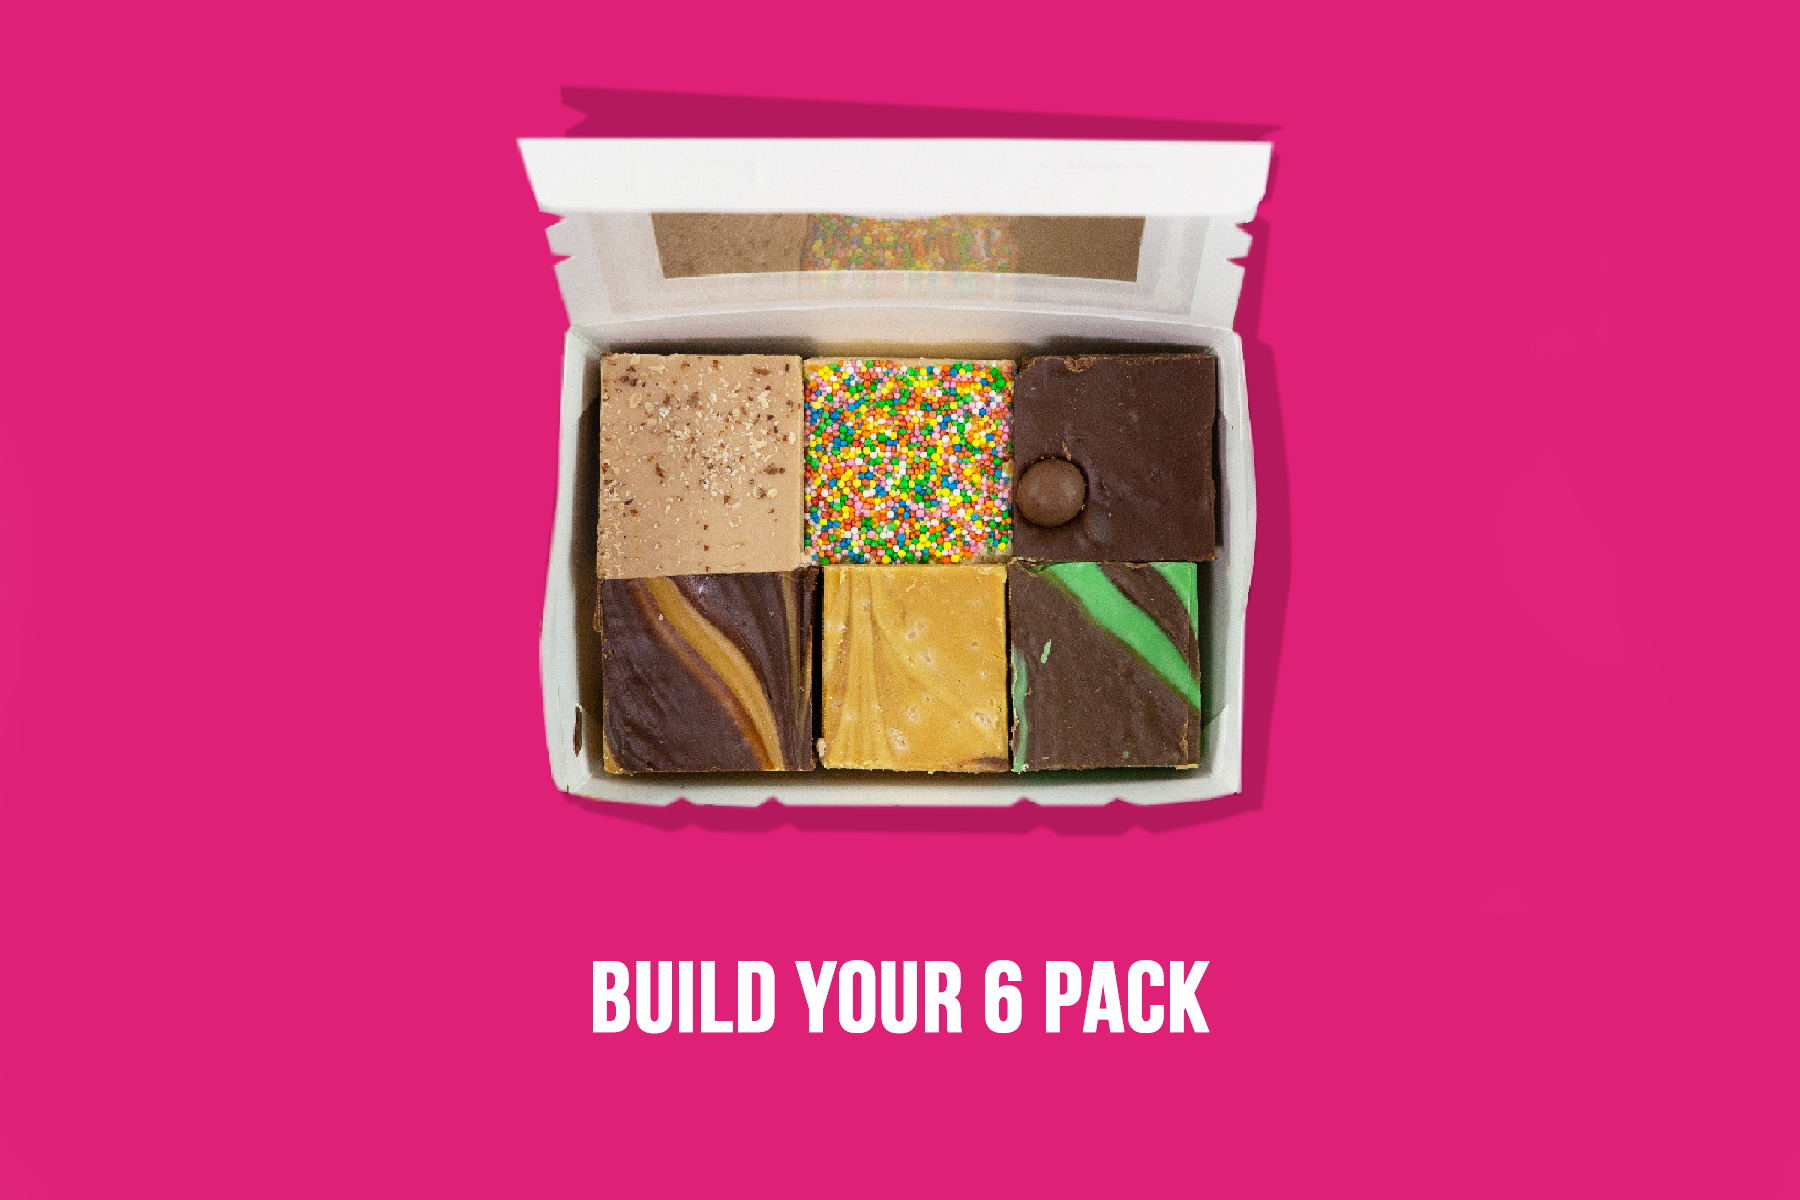 BUILD YOUR OWN FUDGE BOX WITH UP TO 6 INDIVIDUAL FUDGE SQUARES